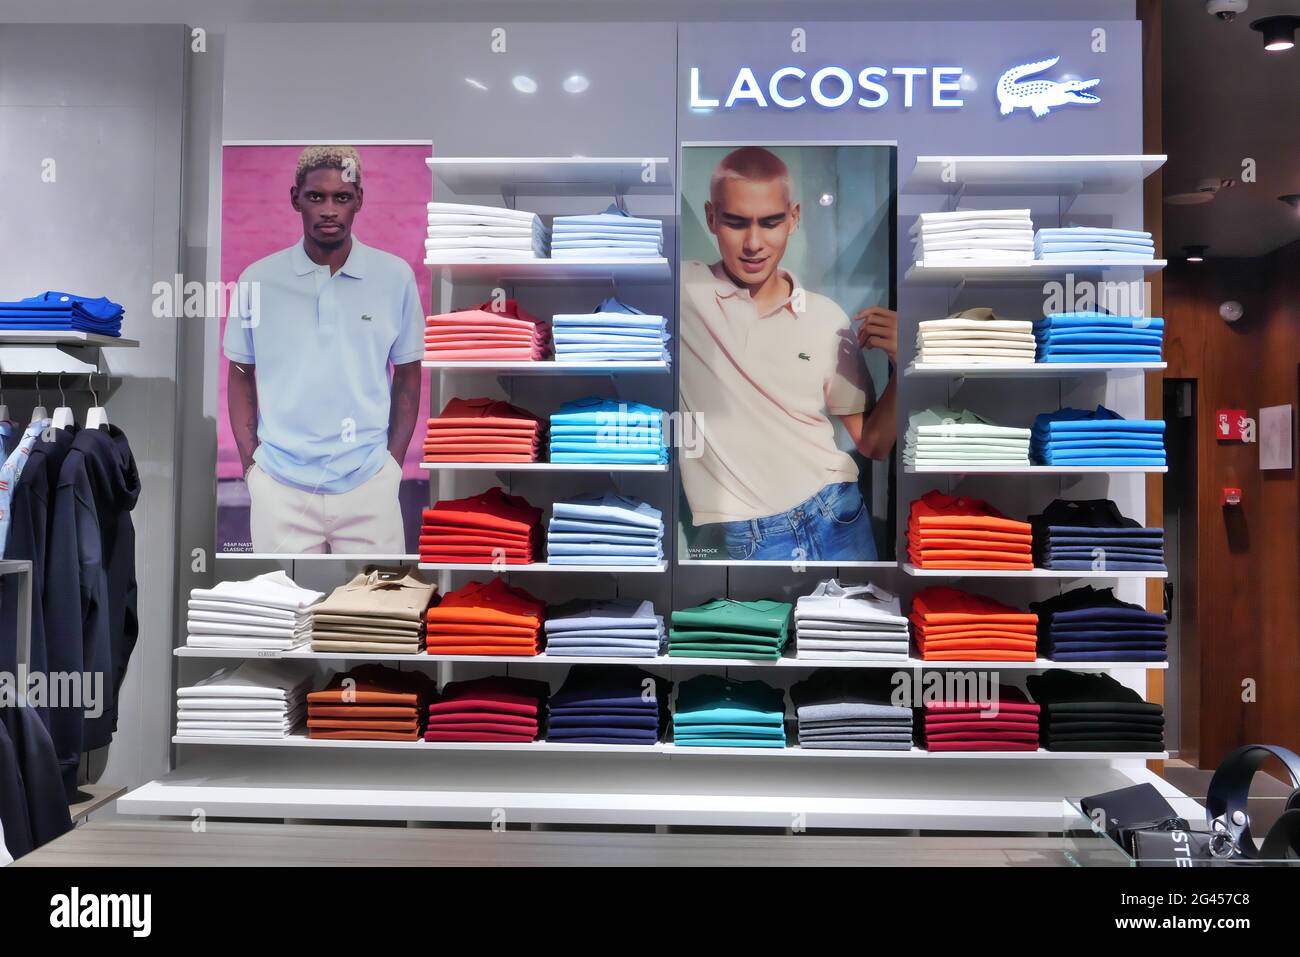 TSHIRTS ON DISPLAY AT LACOSTE BOUTIQUE INSIDE THE RINASCENTE FASHION STORE  Stock Photo - Alamy